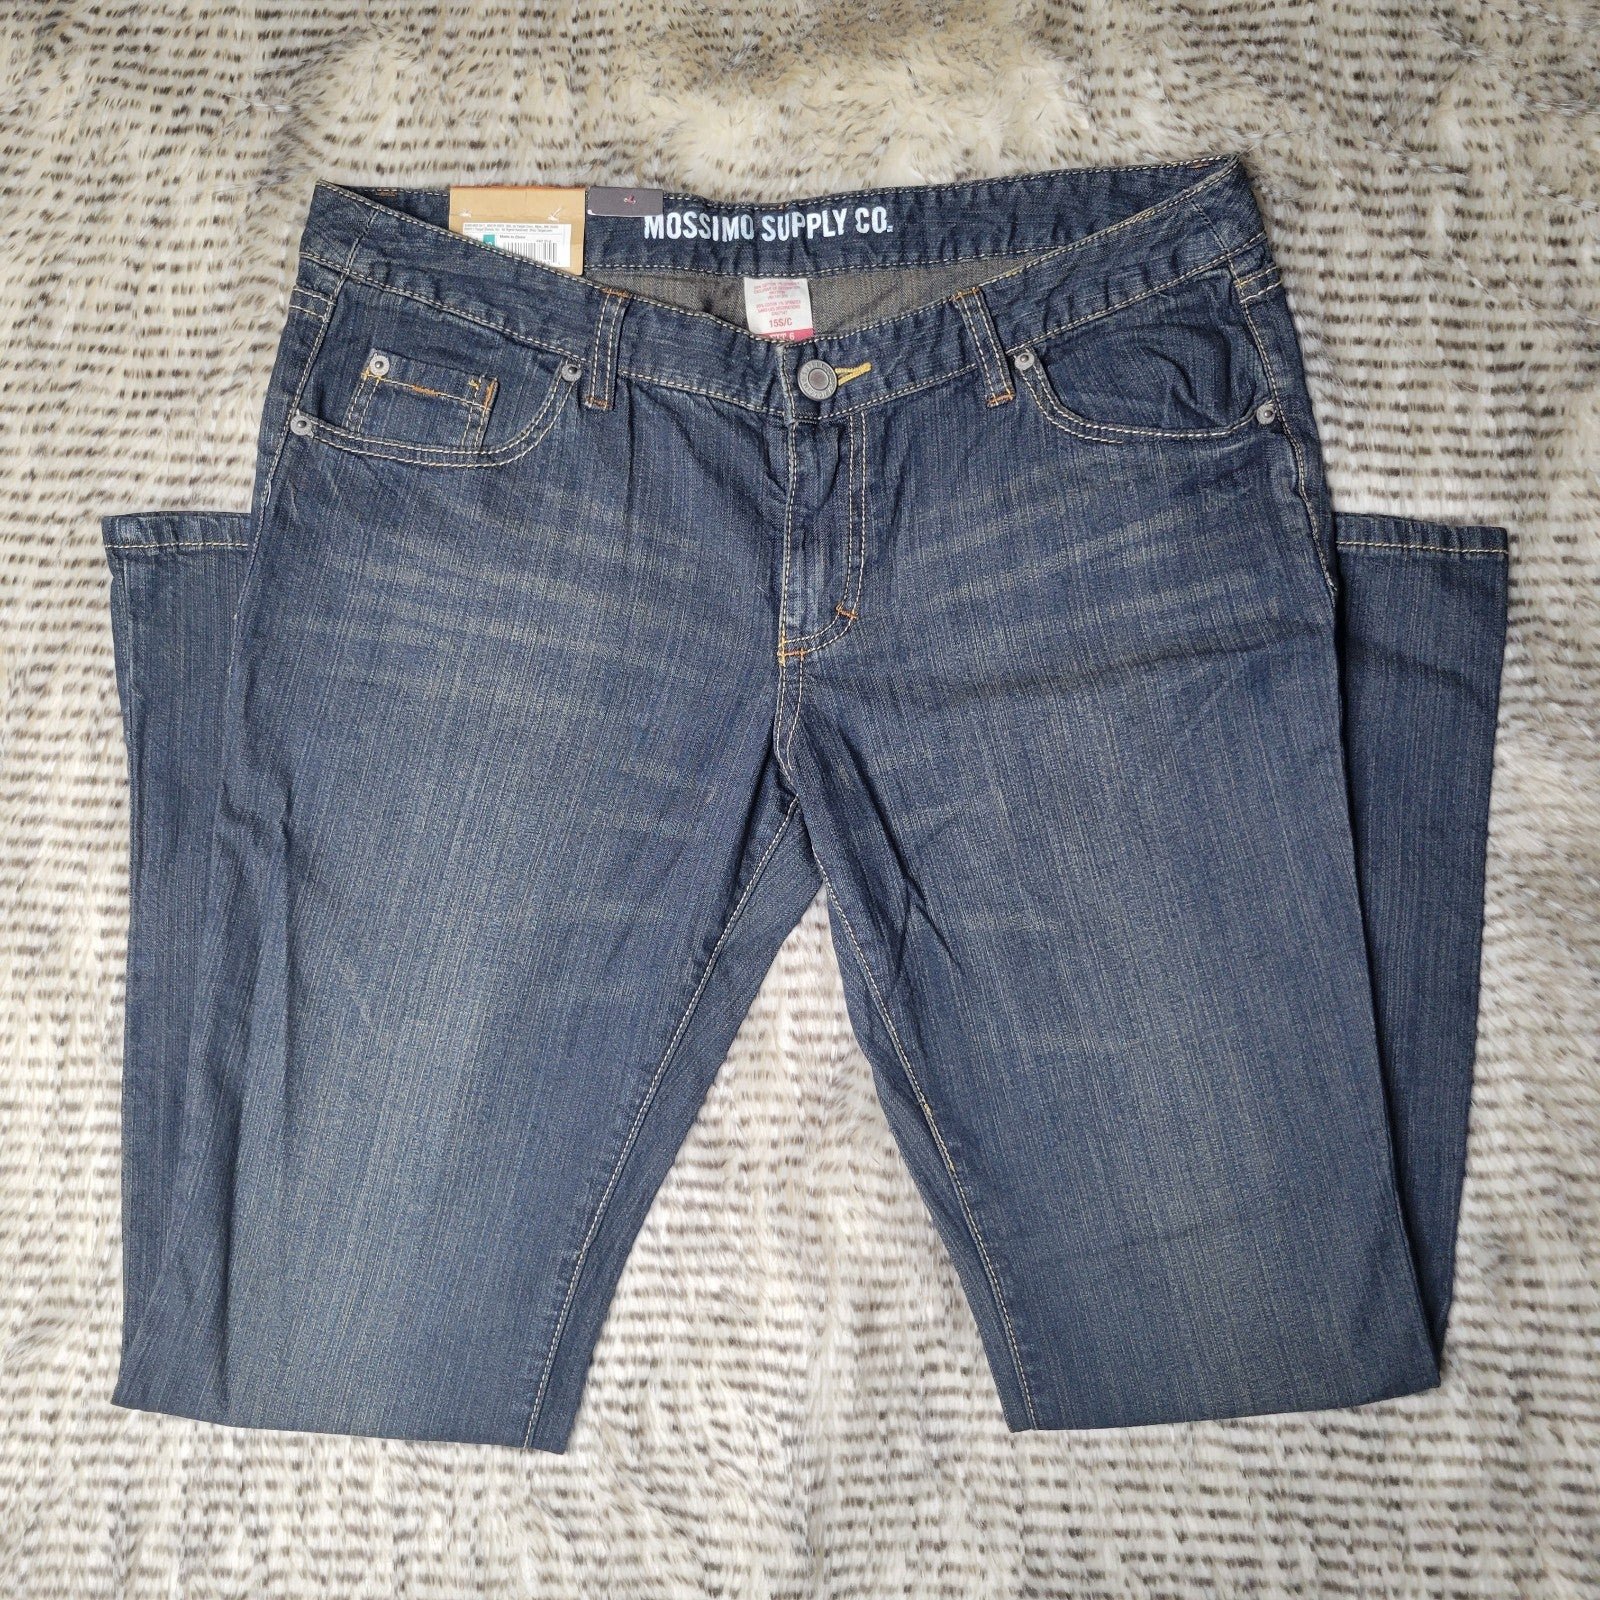 Buy Mossimo Supply Co. Bootcut jeans size 15S LG4KV2CjQ